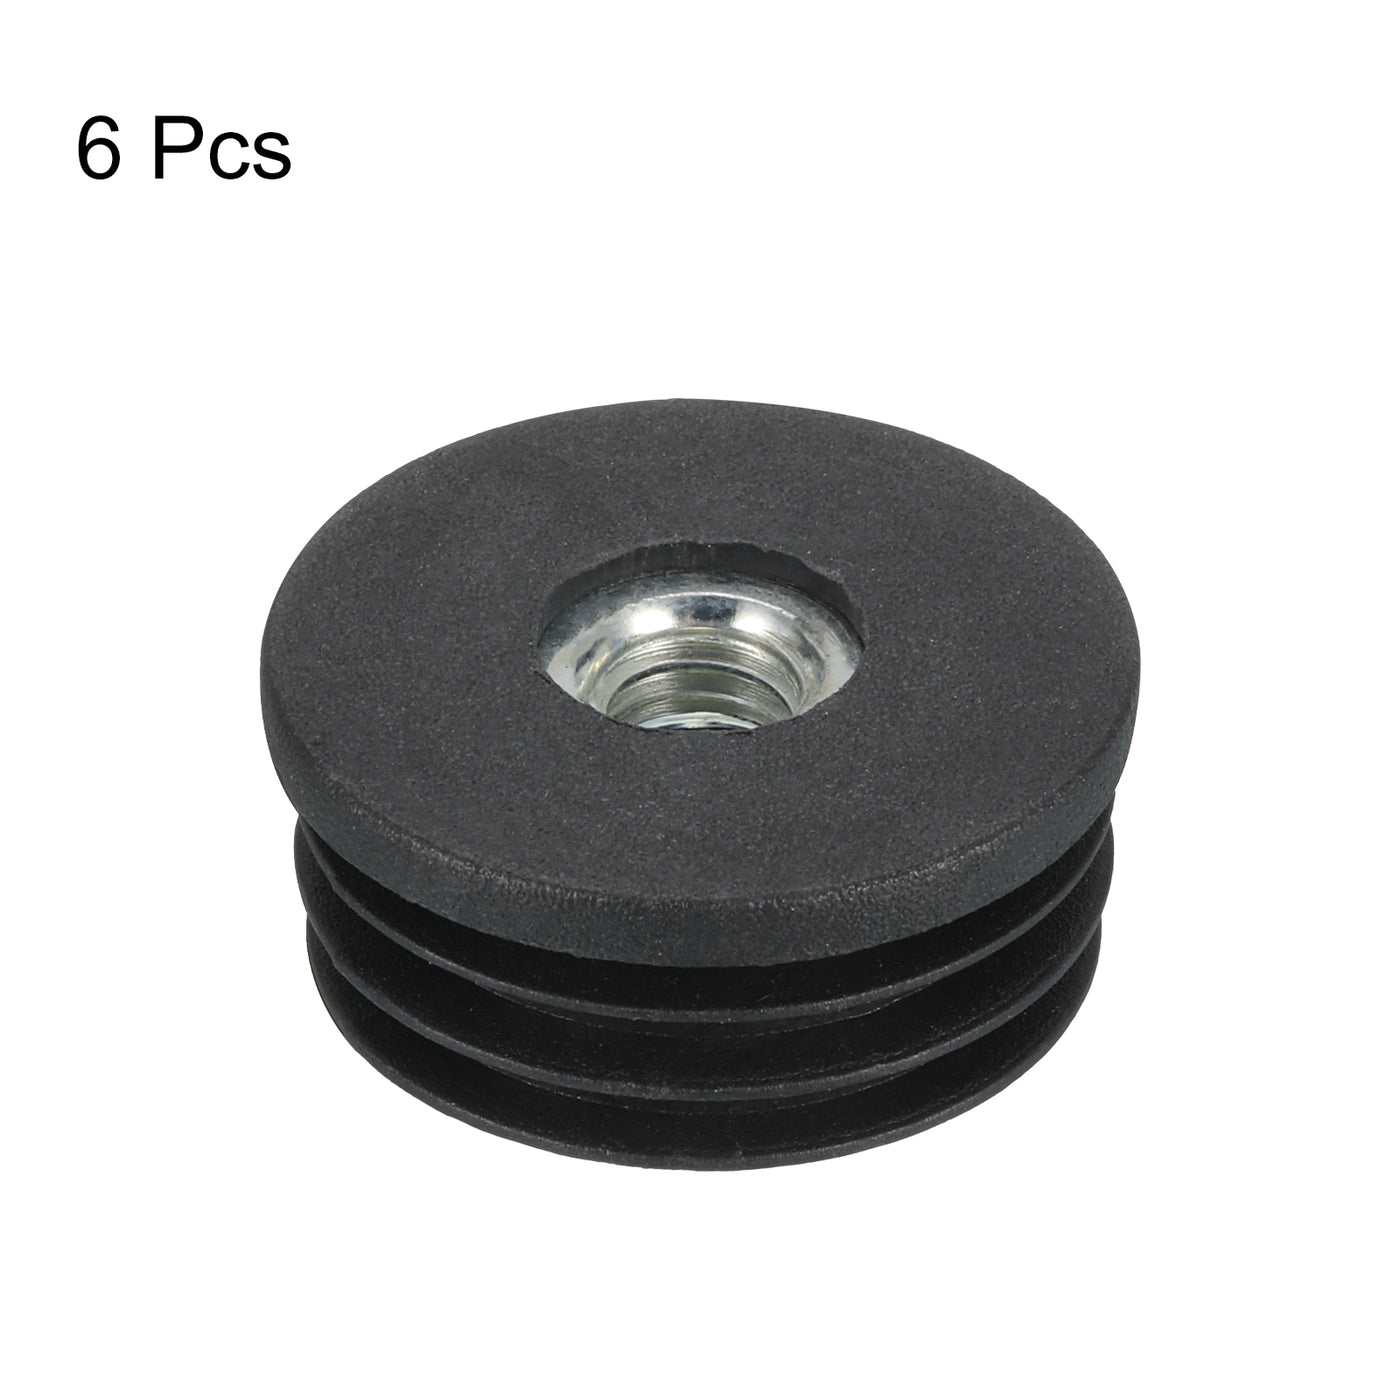 uxcell Uxcell 6Pcs Caster Insert with Thread, 32mm/1.26" M8 Thread for Furniture